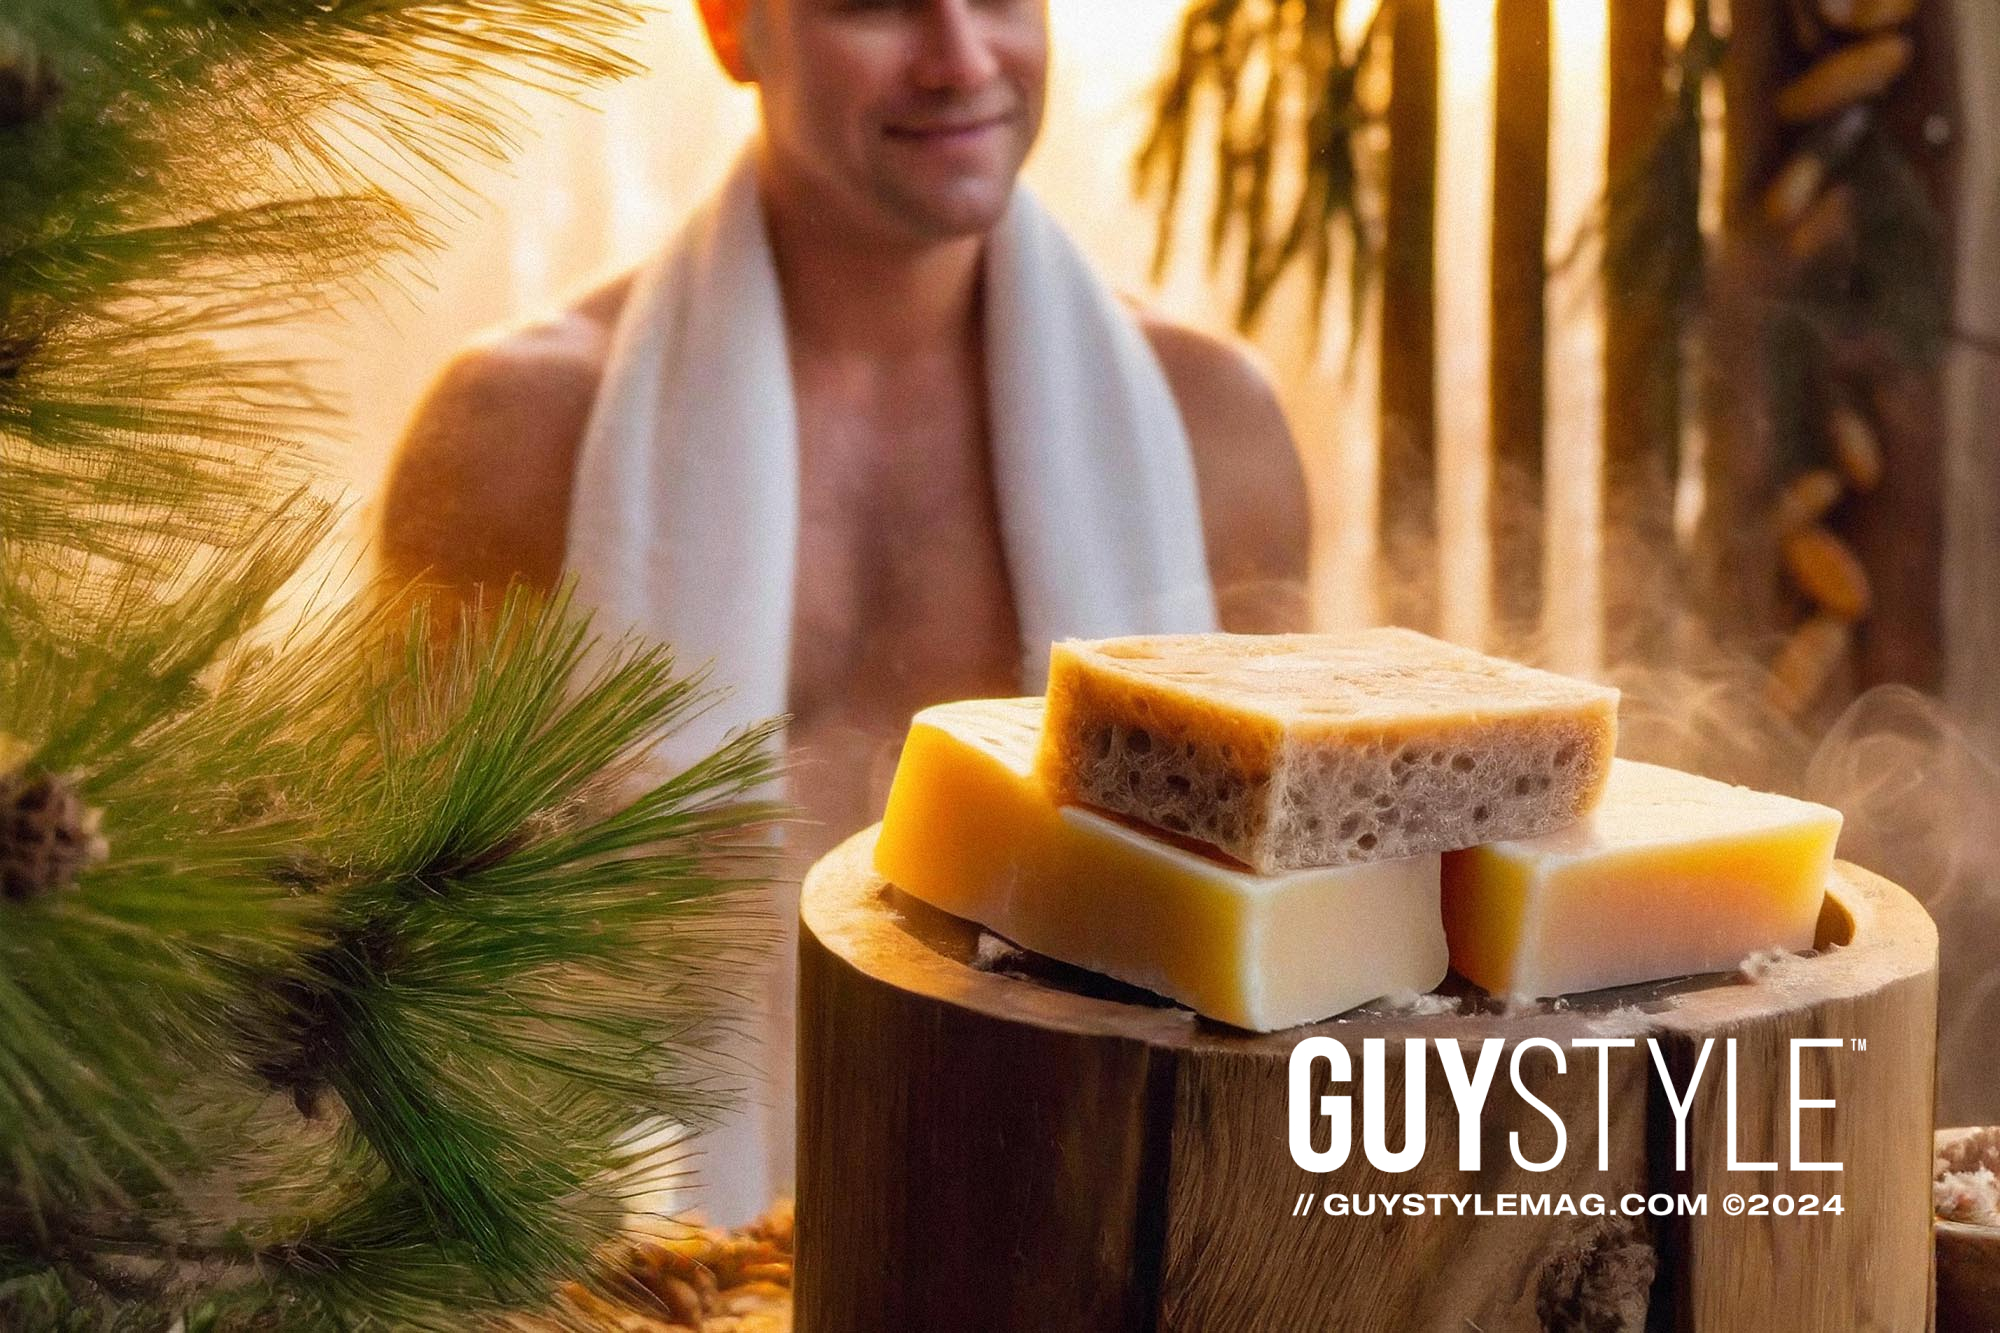 Firefly Natural Soap Bars In A Rustic Steamy Sauna With Pine Needles And A Shirtless Man With White 2 